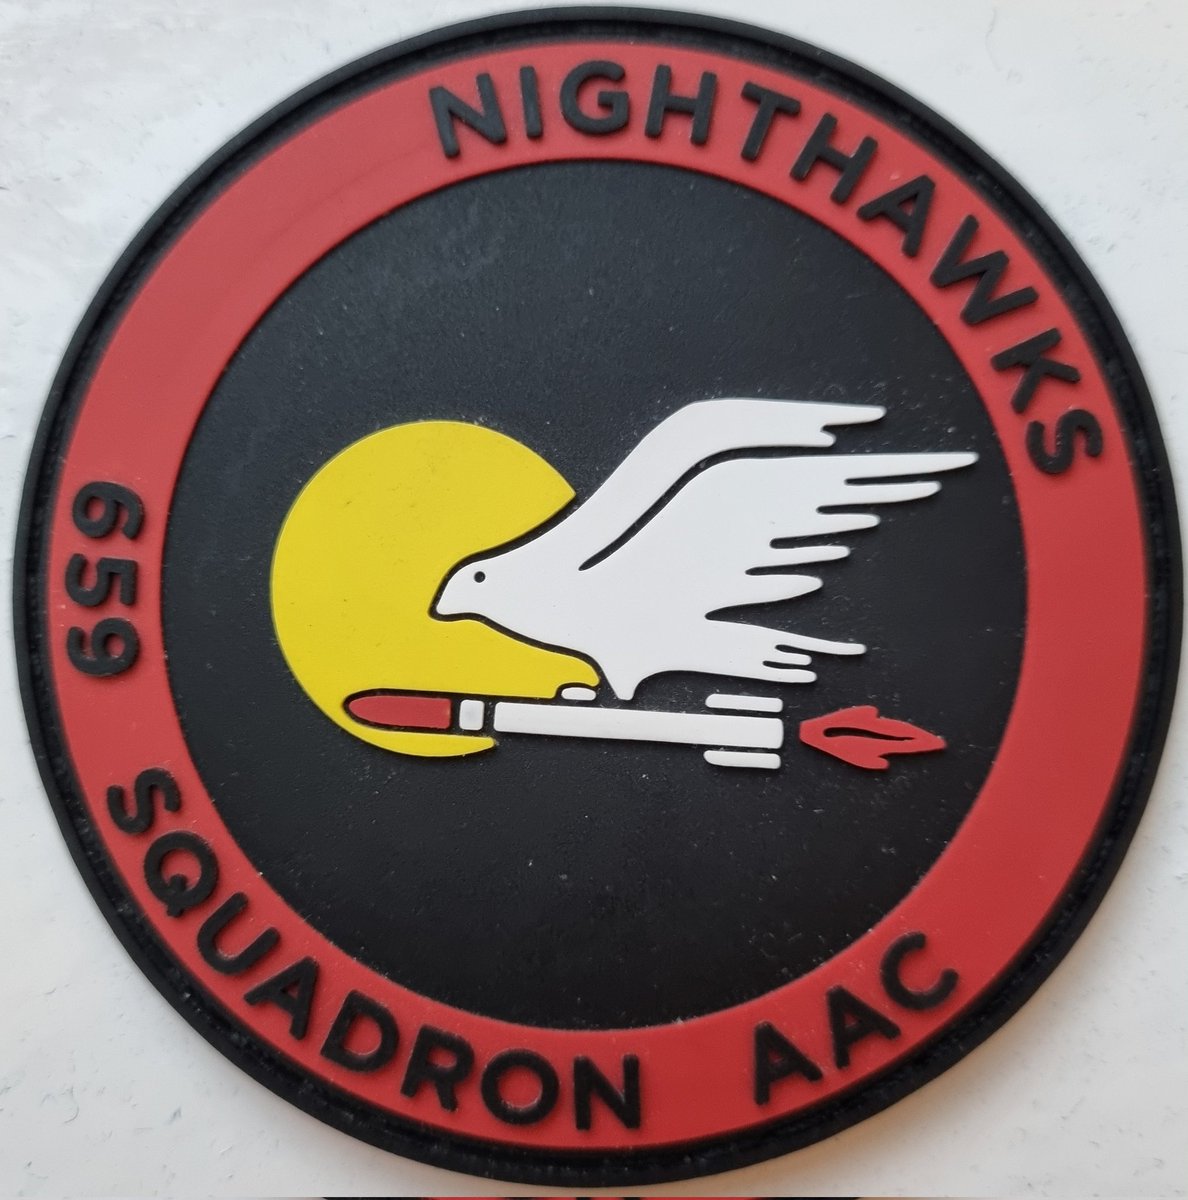 #OTD in 1946, HRH King George VI approved the design of the crest of 659 Sqn. Later 659 gained the nickname ‘#Nighthawks’ after becoming one of the first Sqns issued with #nightvision devices.

1/

  #aviation #history #legacy #helicopterhistory #patches #militarypatches